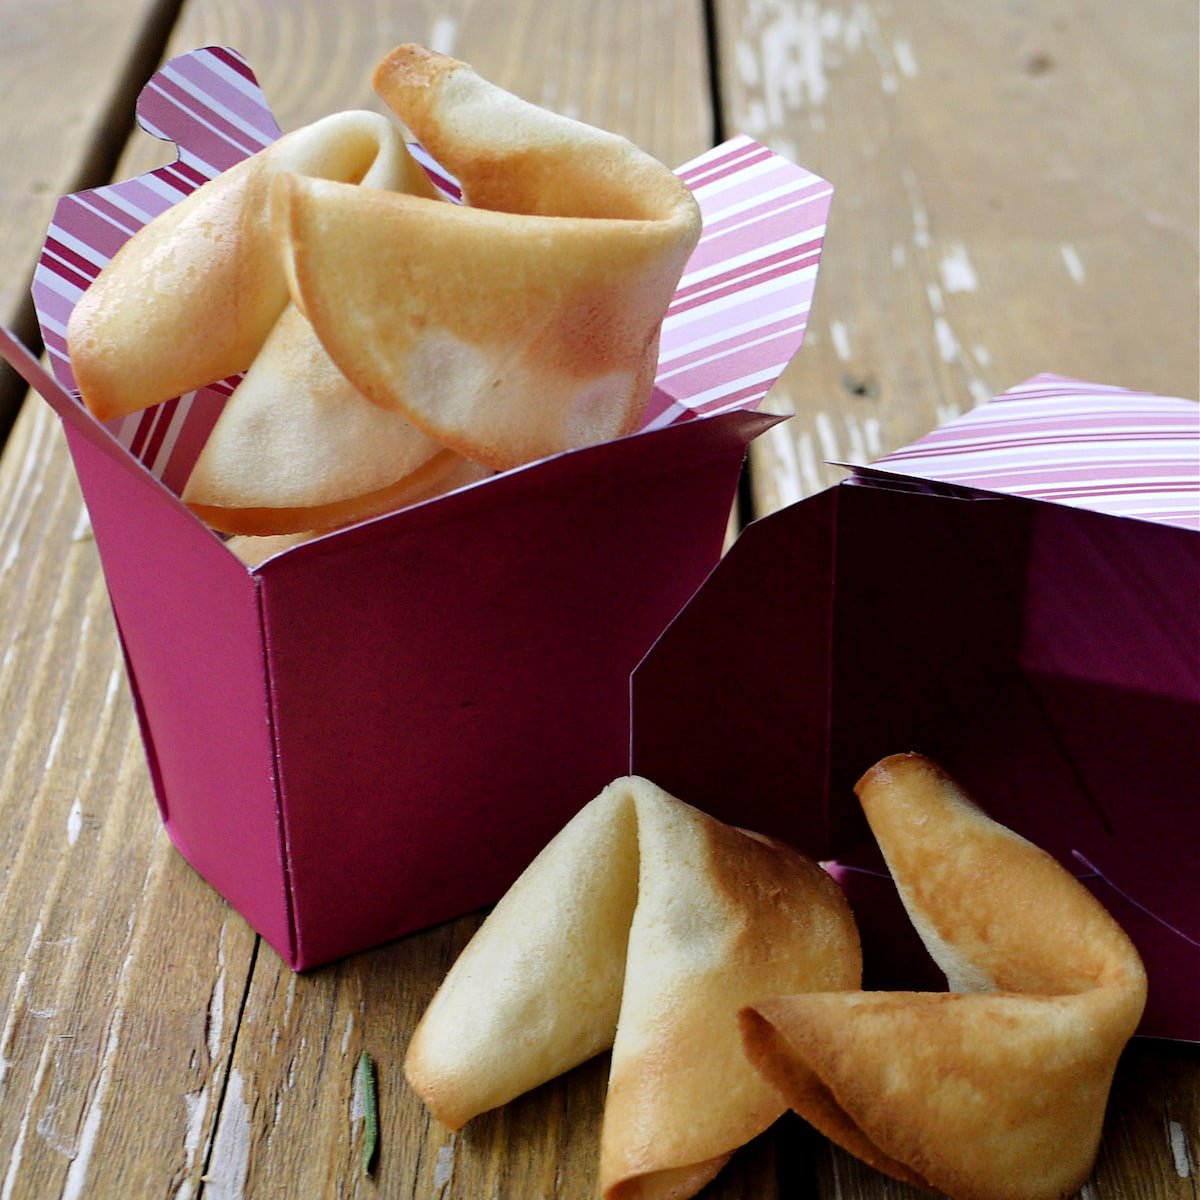 Fresh fortune cookies in a maroon and pink Chinese takeout box.